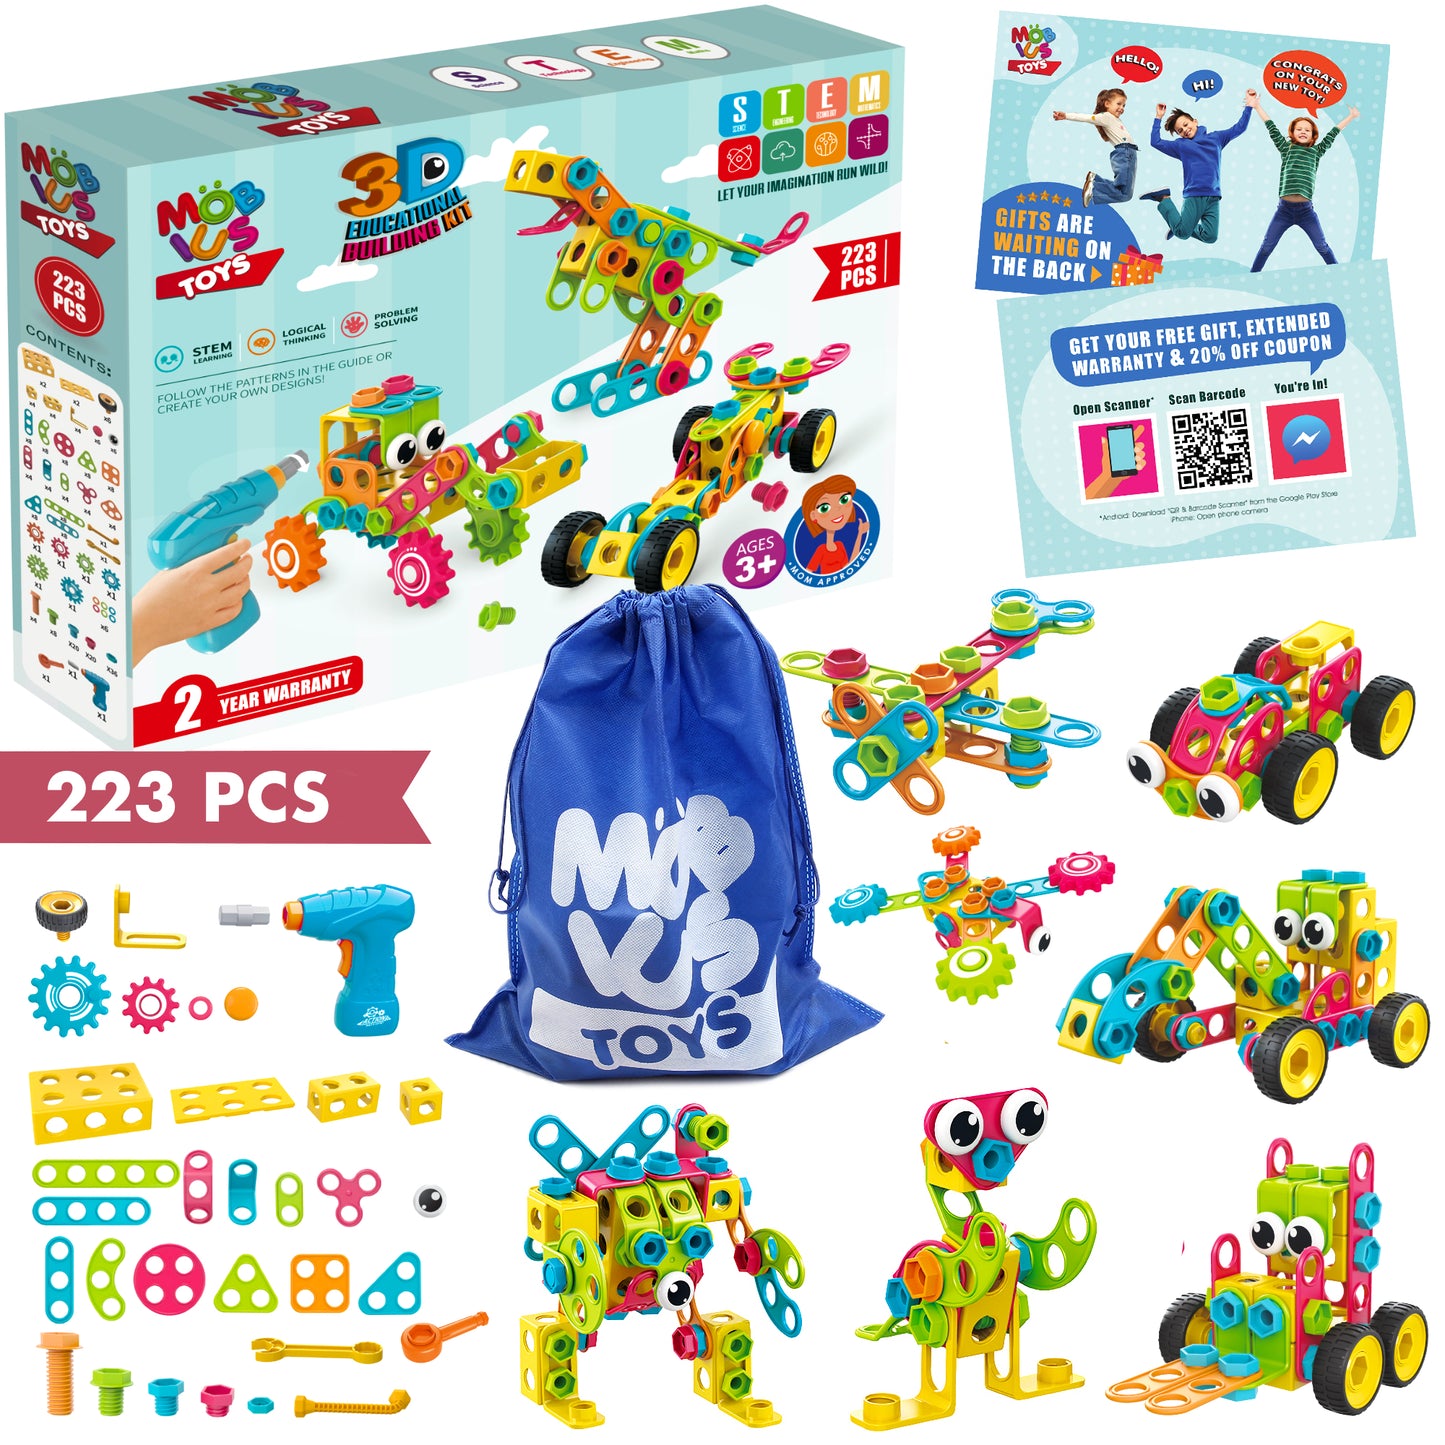 STEM Toys KIT 260 Piece Educational Construction Set with Drill